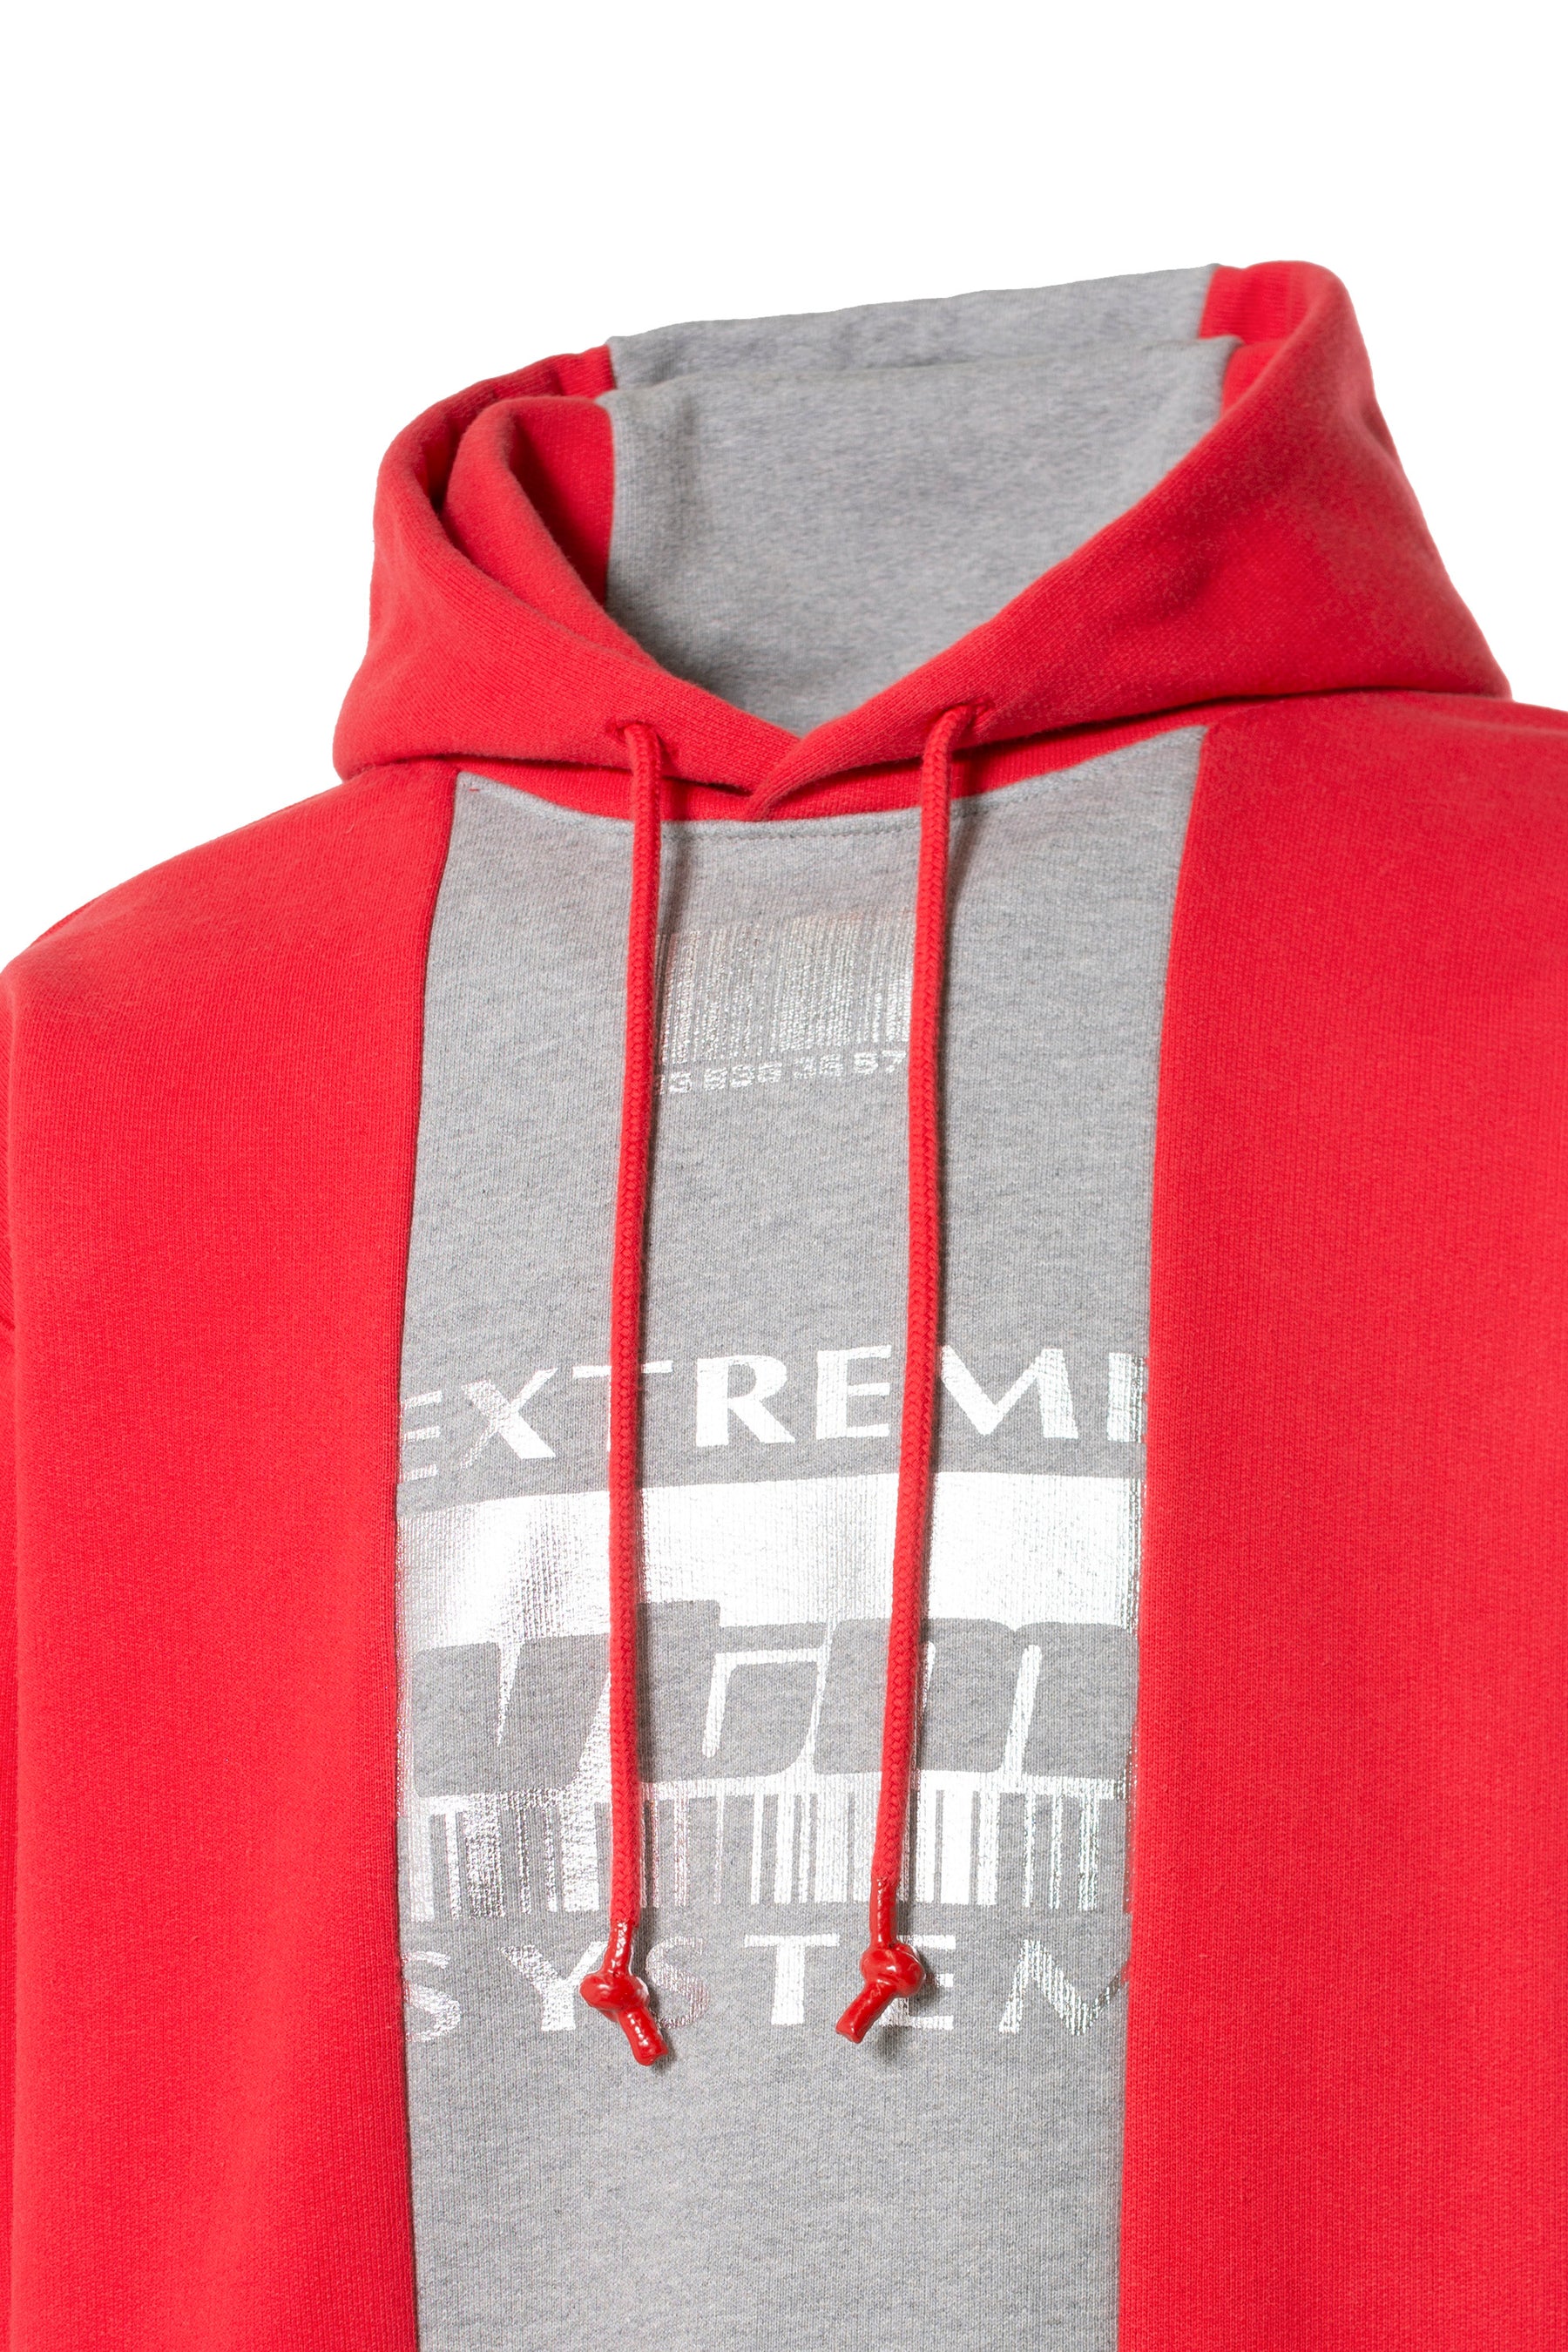 EXTREME SYSTEM HOODIE / RED GRY